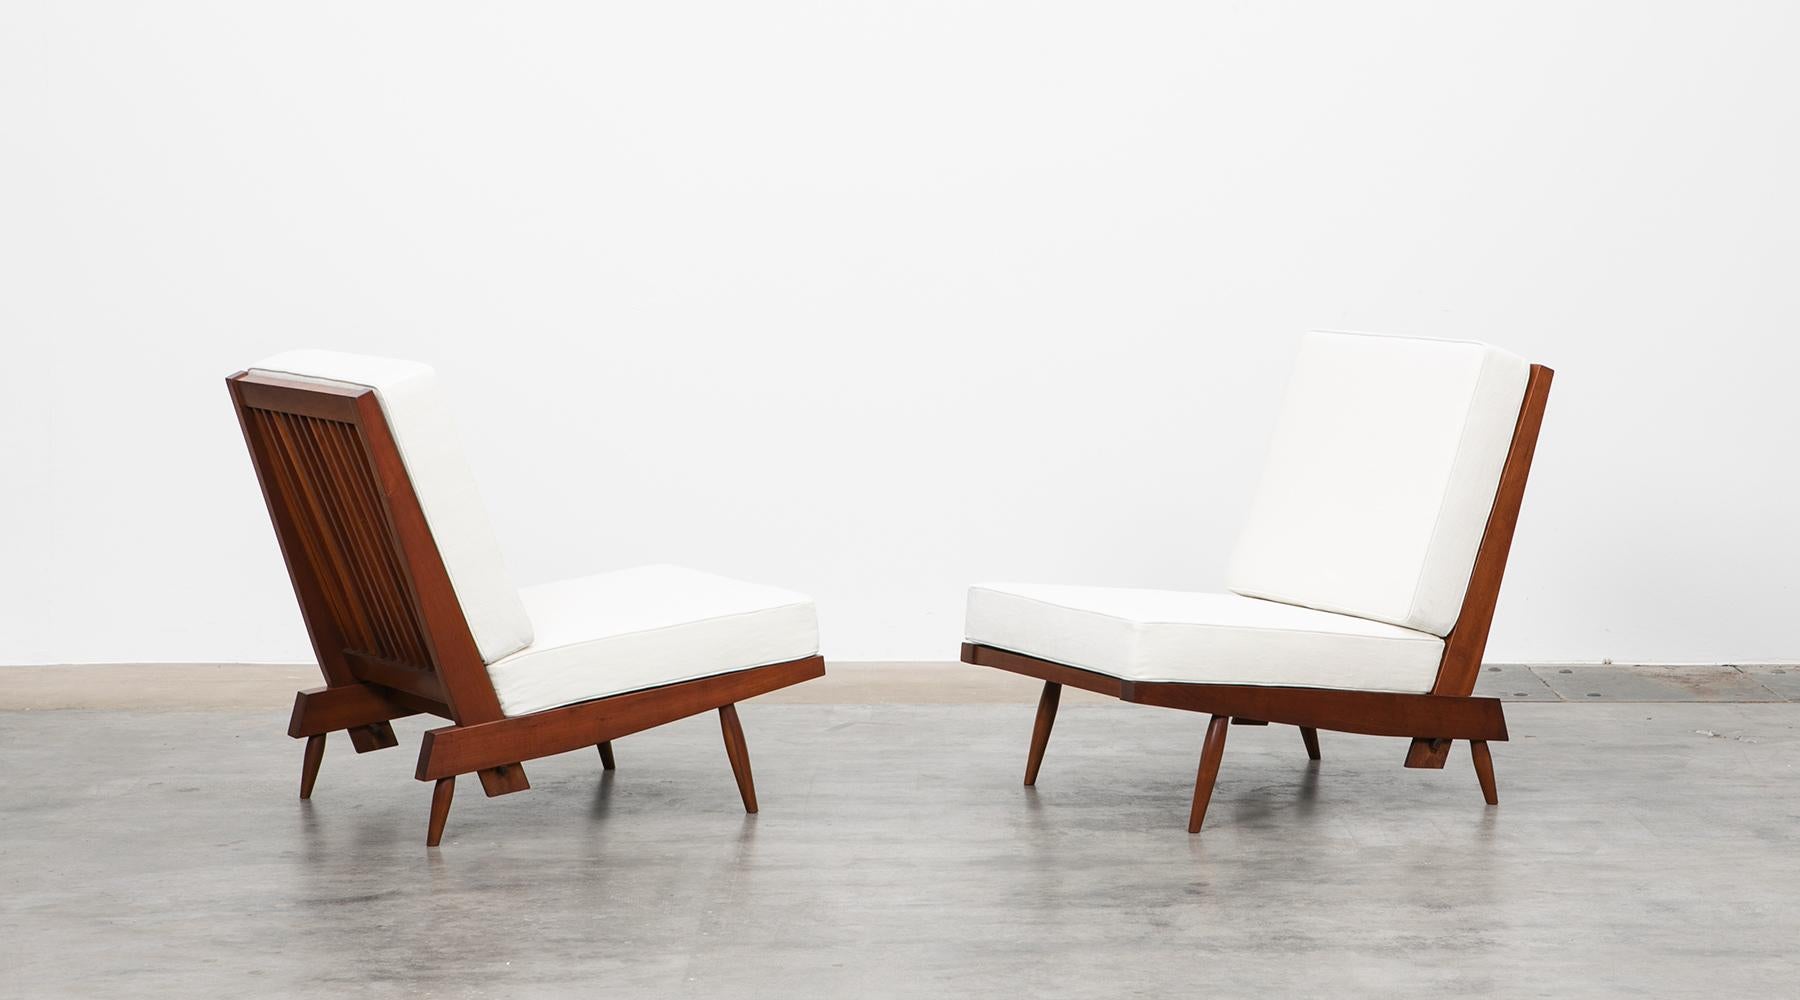 Lounge chairs, walnut, by George Nakashima

Staggering set of lounge chairs constructed with American walnut through handwork by George Nakashima himself. The light feet and frame combined with the generous seating cushions provide style and